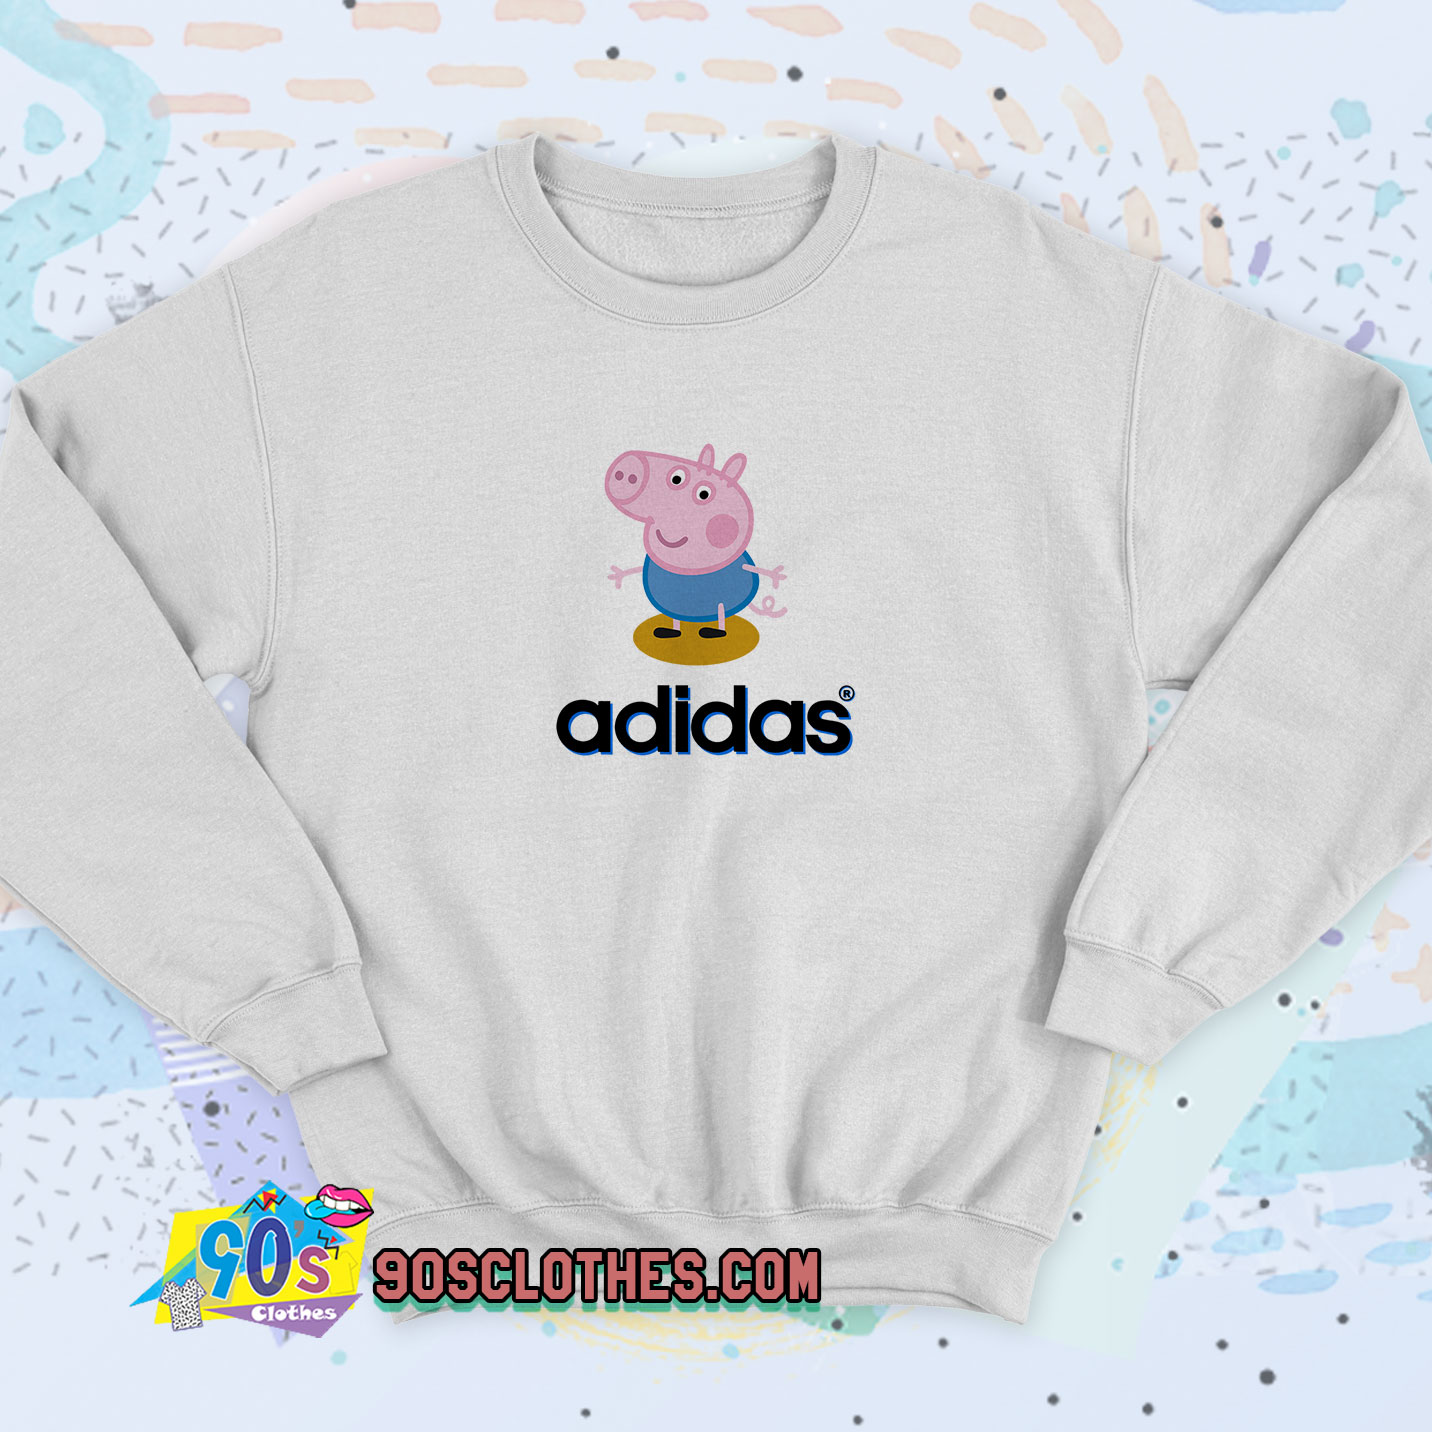 So many More From George Peppa Pig Adidas Sweatshirt Style - 90sclothes.com